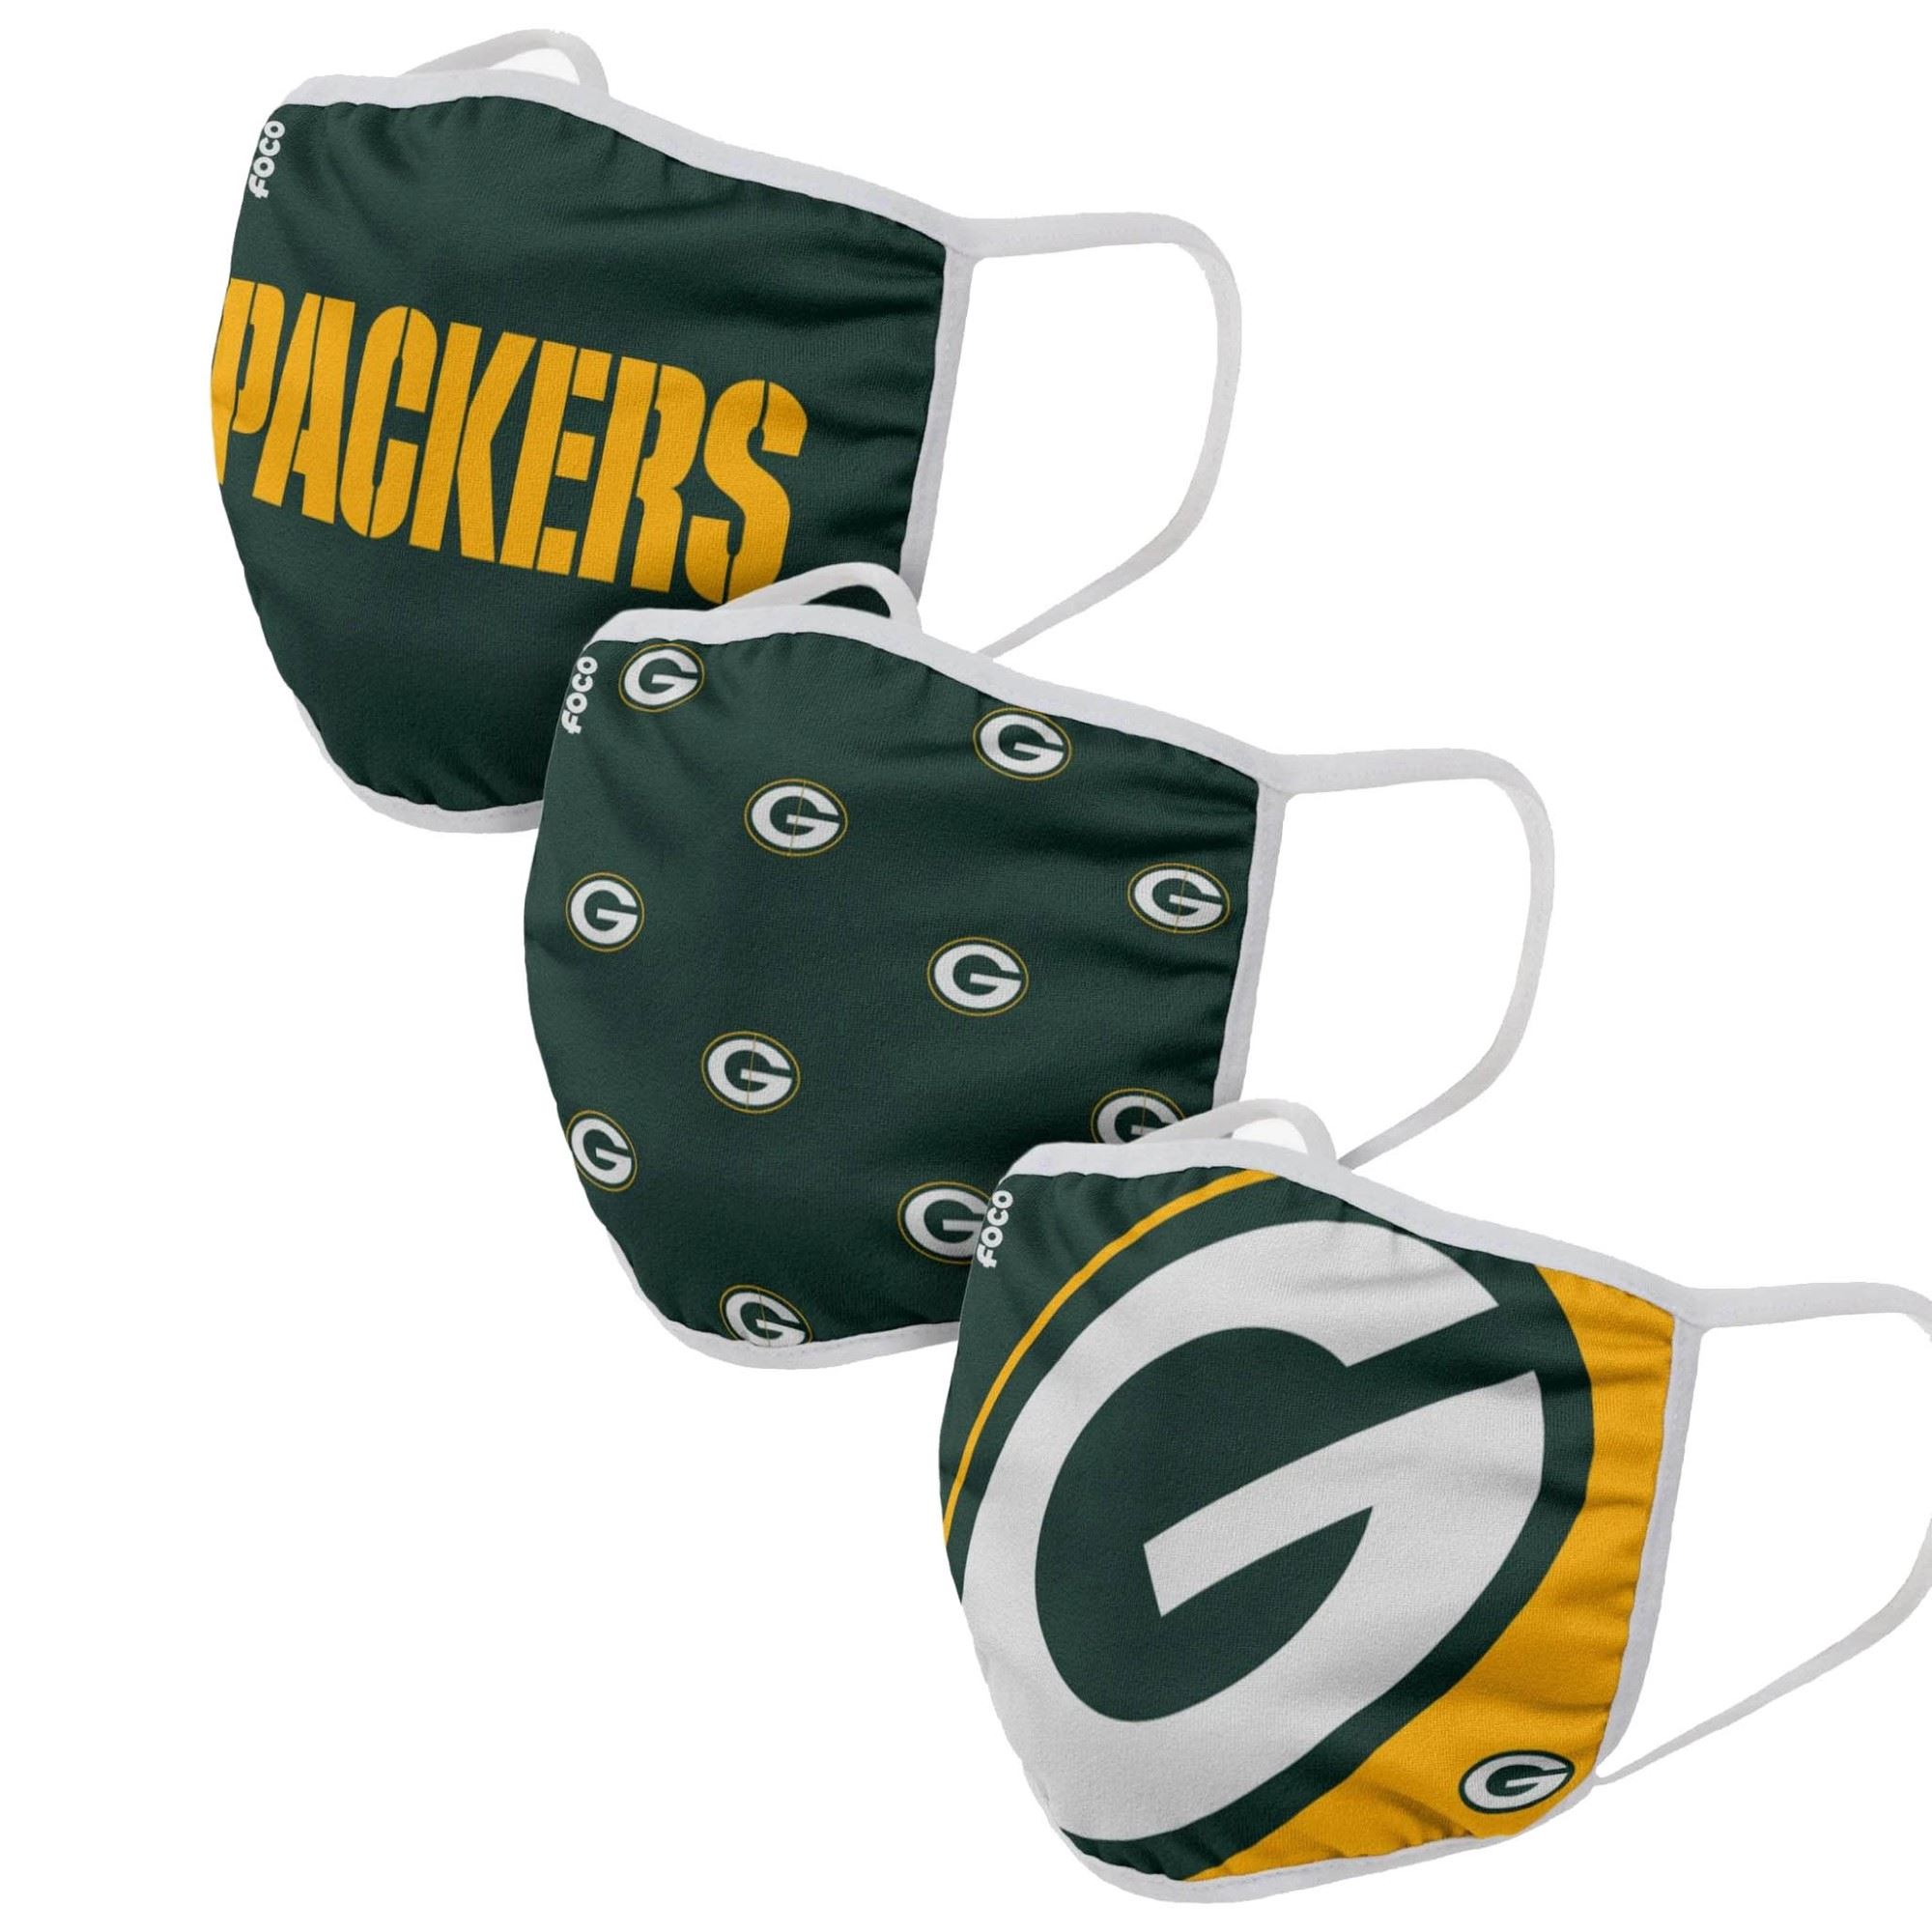 Green Bay Packers NFL Face Covering 3Pack Face Mask Forever Collectibles